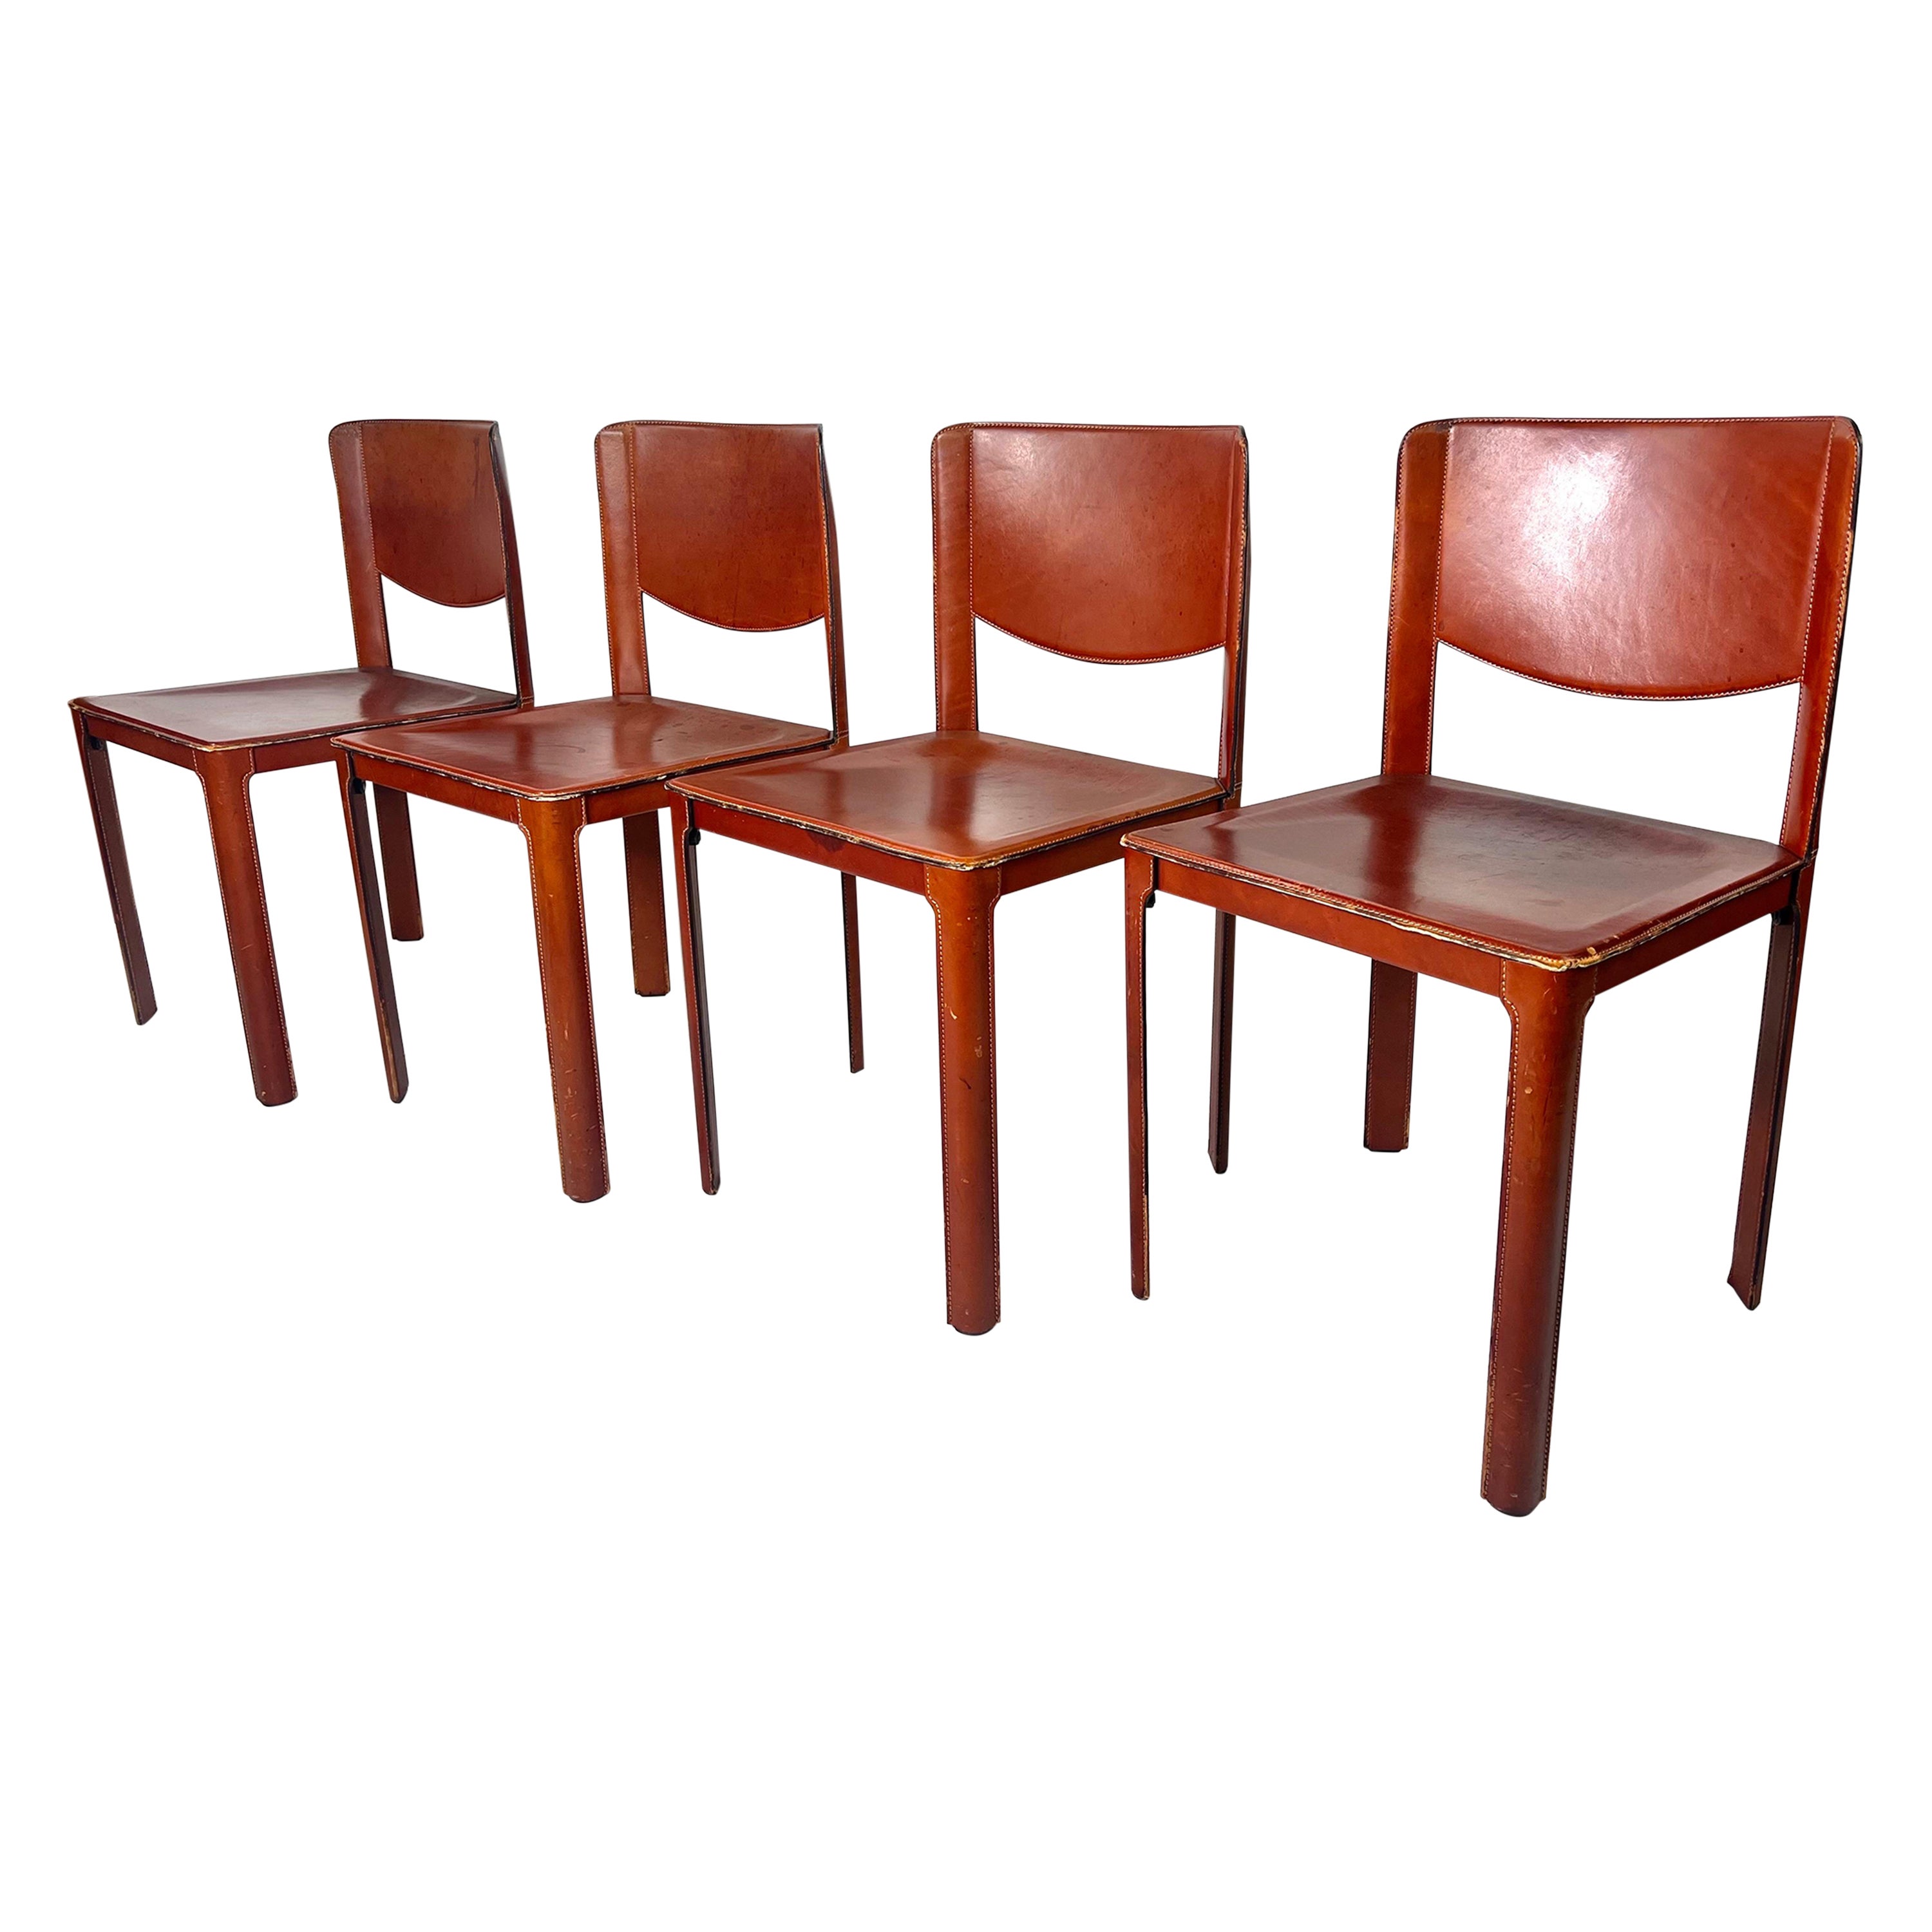 Vintage Modern Matteo Grassi Red Leather Chairs, Set of 4